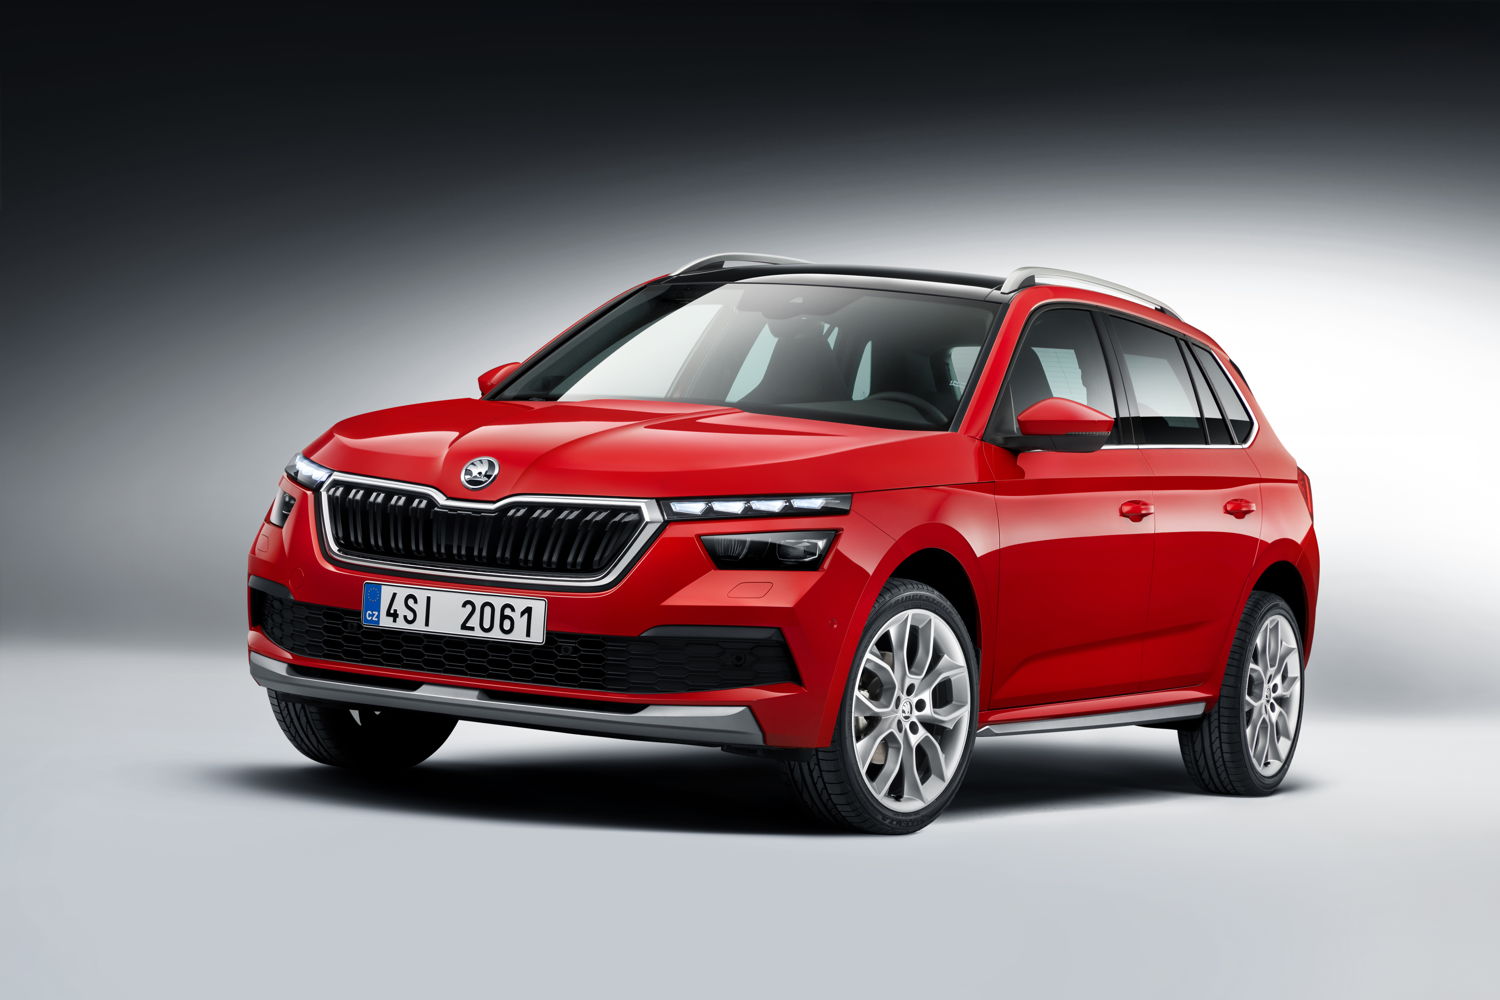 With the new KAMIQ, ŠKODA is presenting the brand’s
first city SUV in Geneva. It combines the advantages of an
SUV such as greater ground clearance and higher sitting
position with a stylish off-road appearance and the agility
of a compact vehicle.